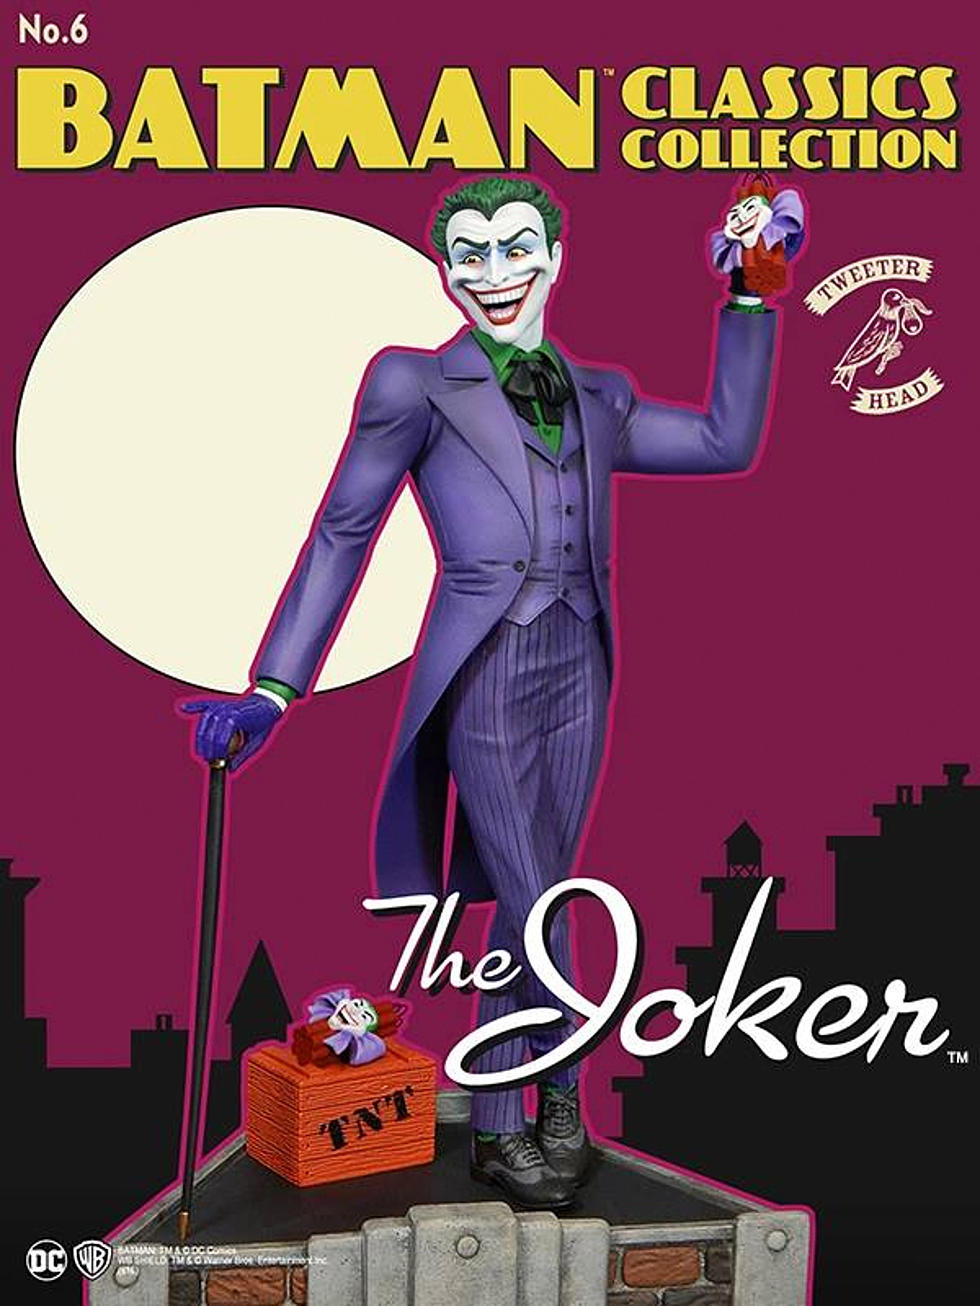 Put A Smile On Your Shelf With Tweeterhead&#8217;s Classic Joker Maquette